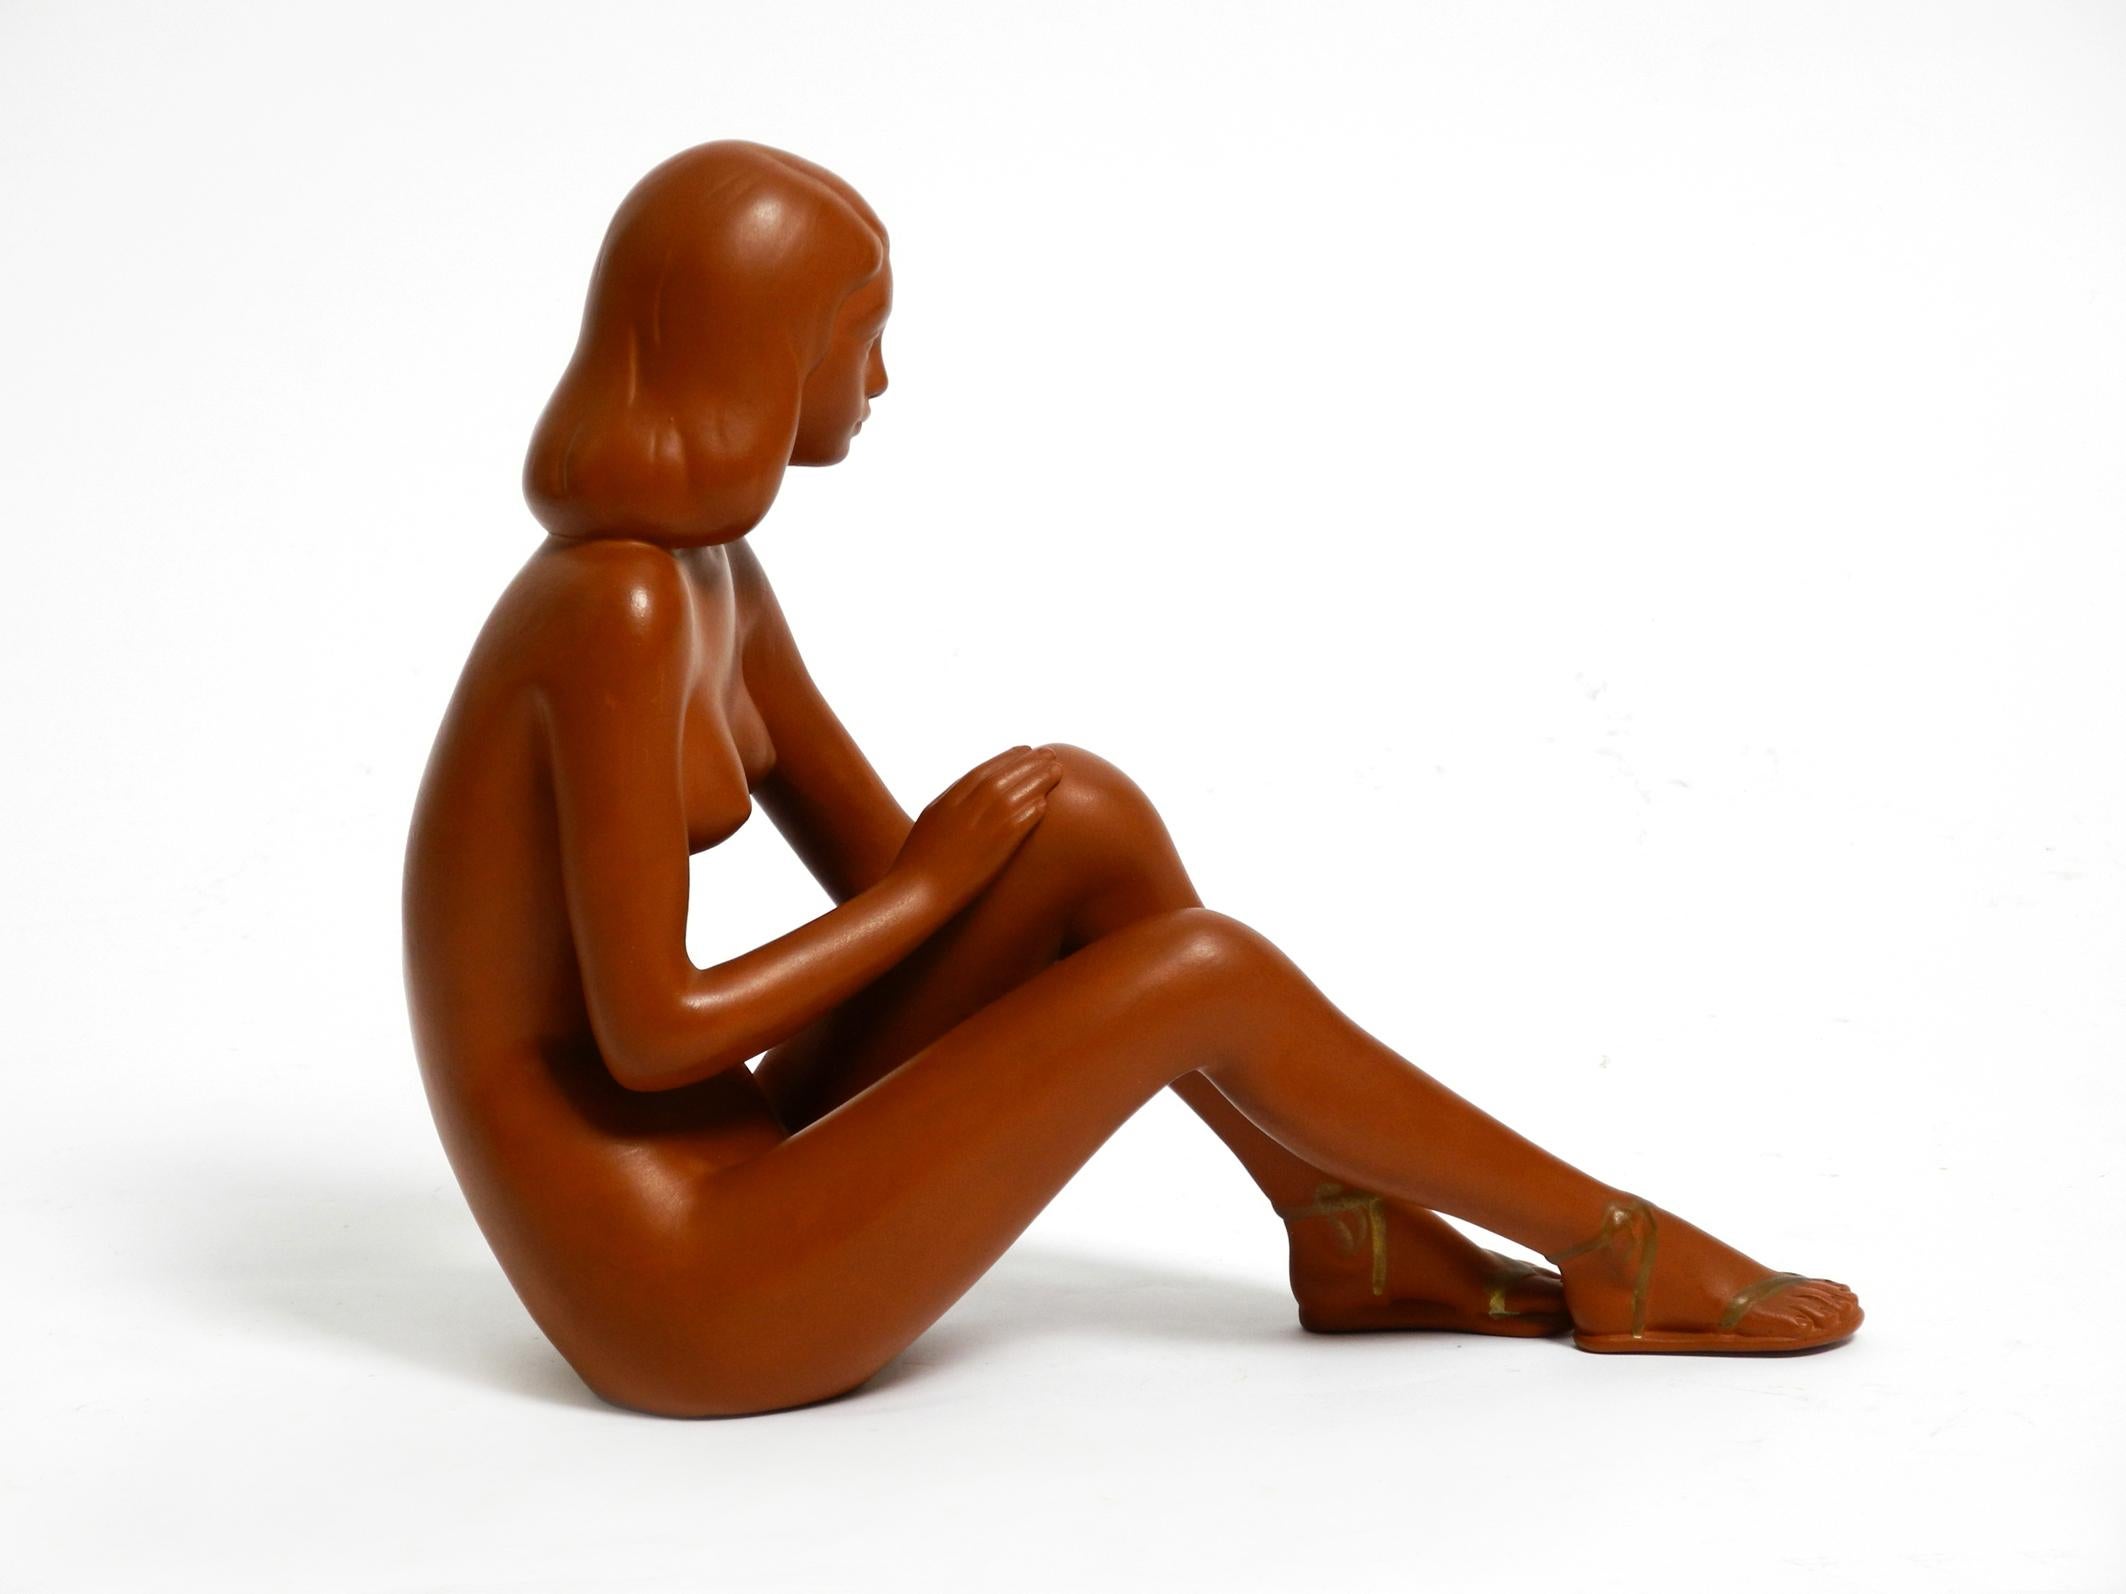 Beautiful large female nude figure made of ceramic.
Table decoration from the 1950s. A midcentury Classic from Gmundner. Made in Austria.
Very good condition with no chips, cracks or breaks.
100% Original condition. Not restored.
Hardly any